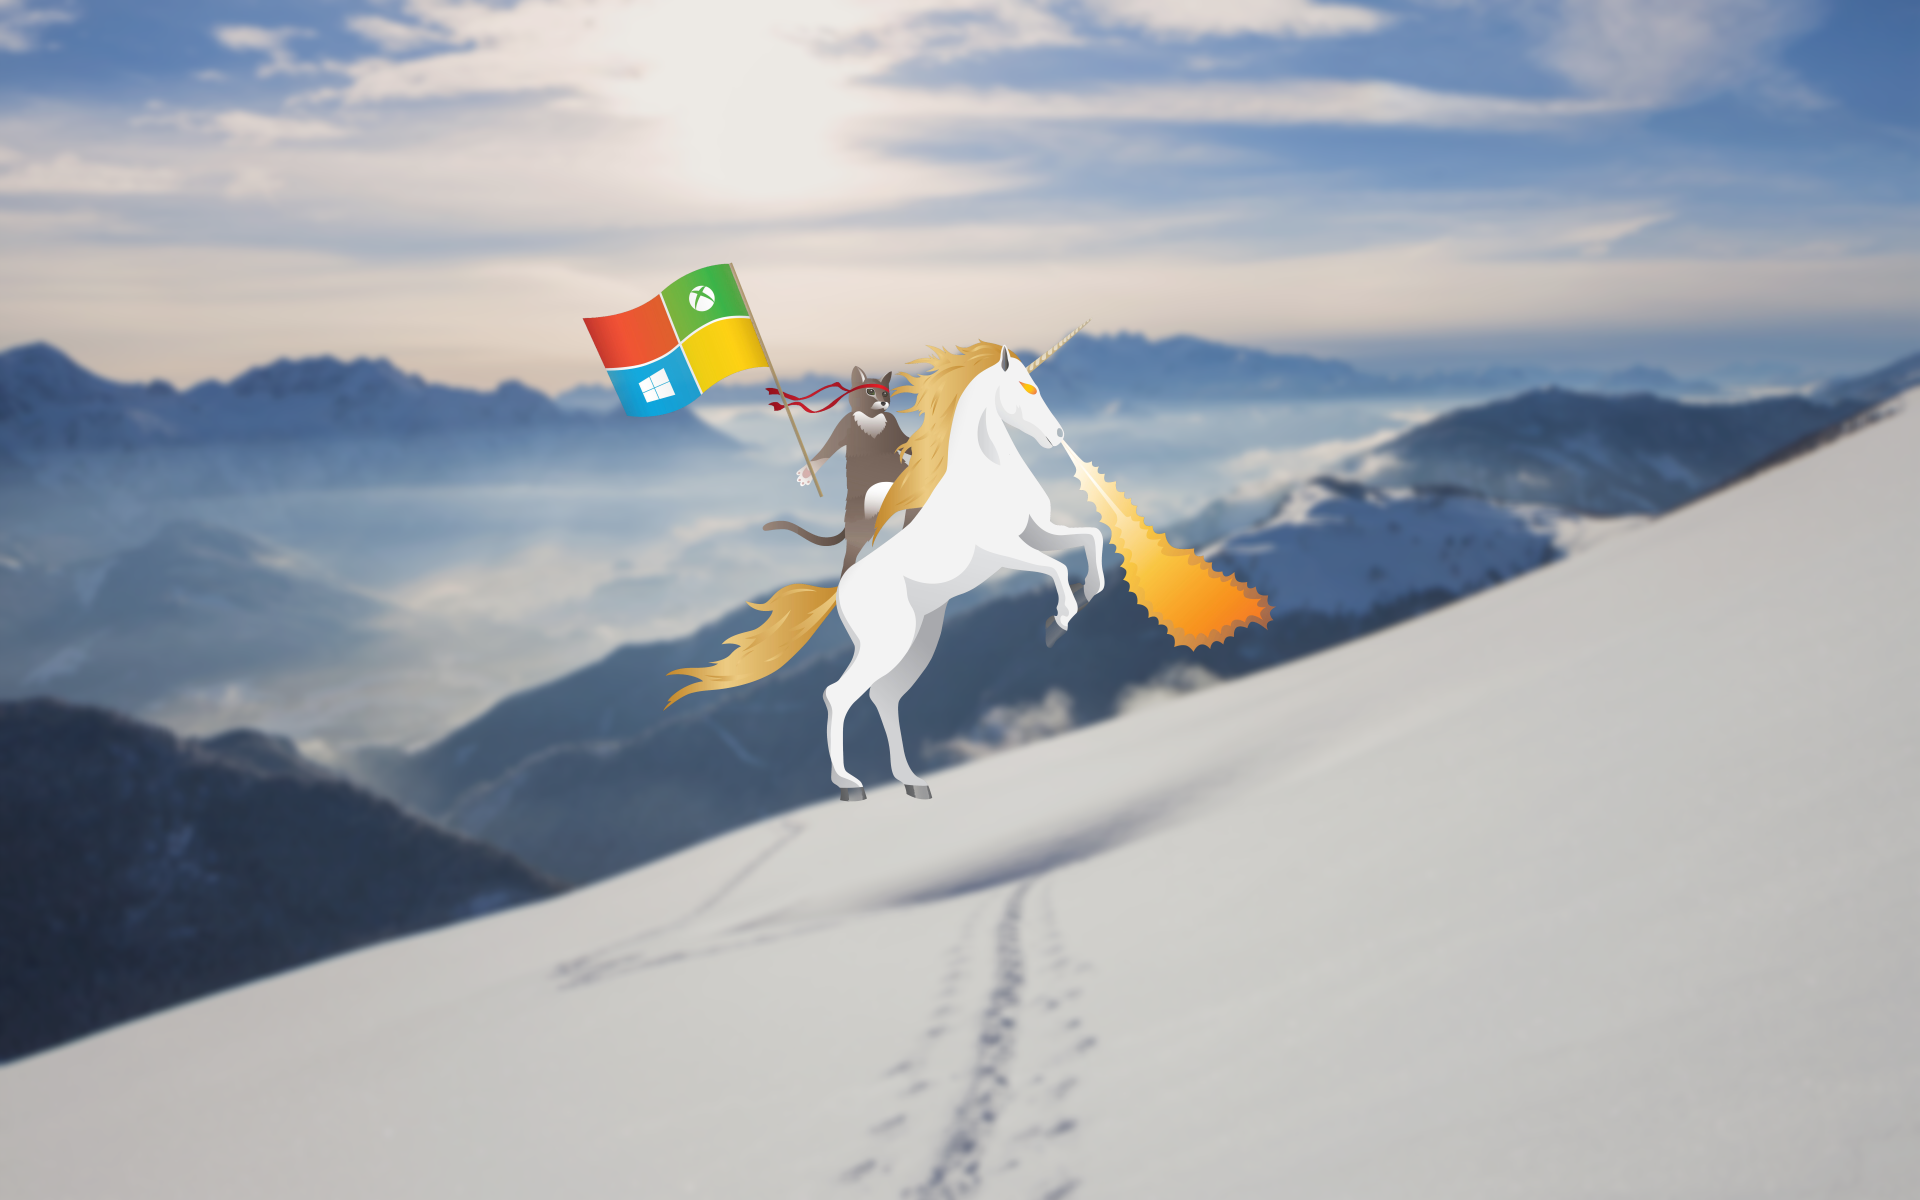 Free Download Here Are A Bunch Of Windows 10 Ninja Cat Wallpapers Microsoft News 1920x1200 For Your Desktop Mobile Tablet Explore 47 Windows 10 Unicorn Wallpaper Windows 10 New